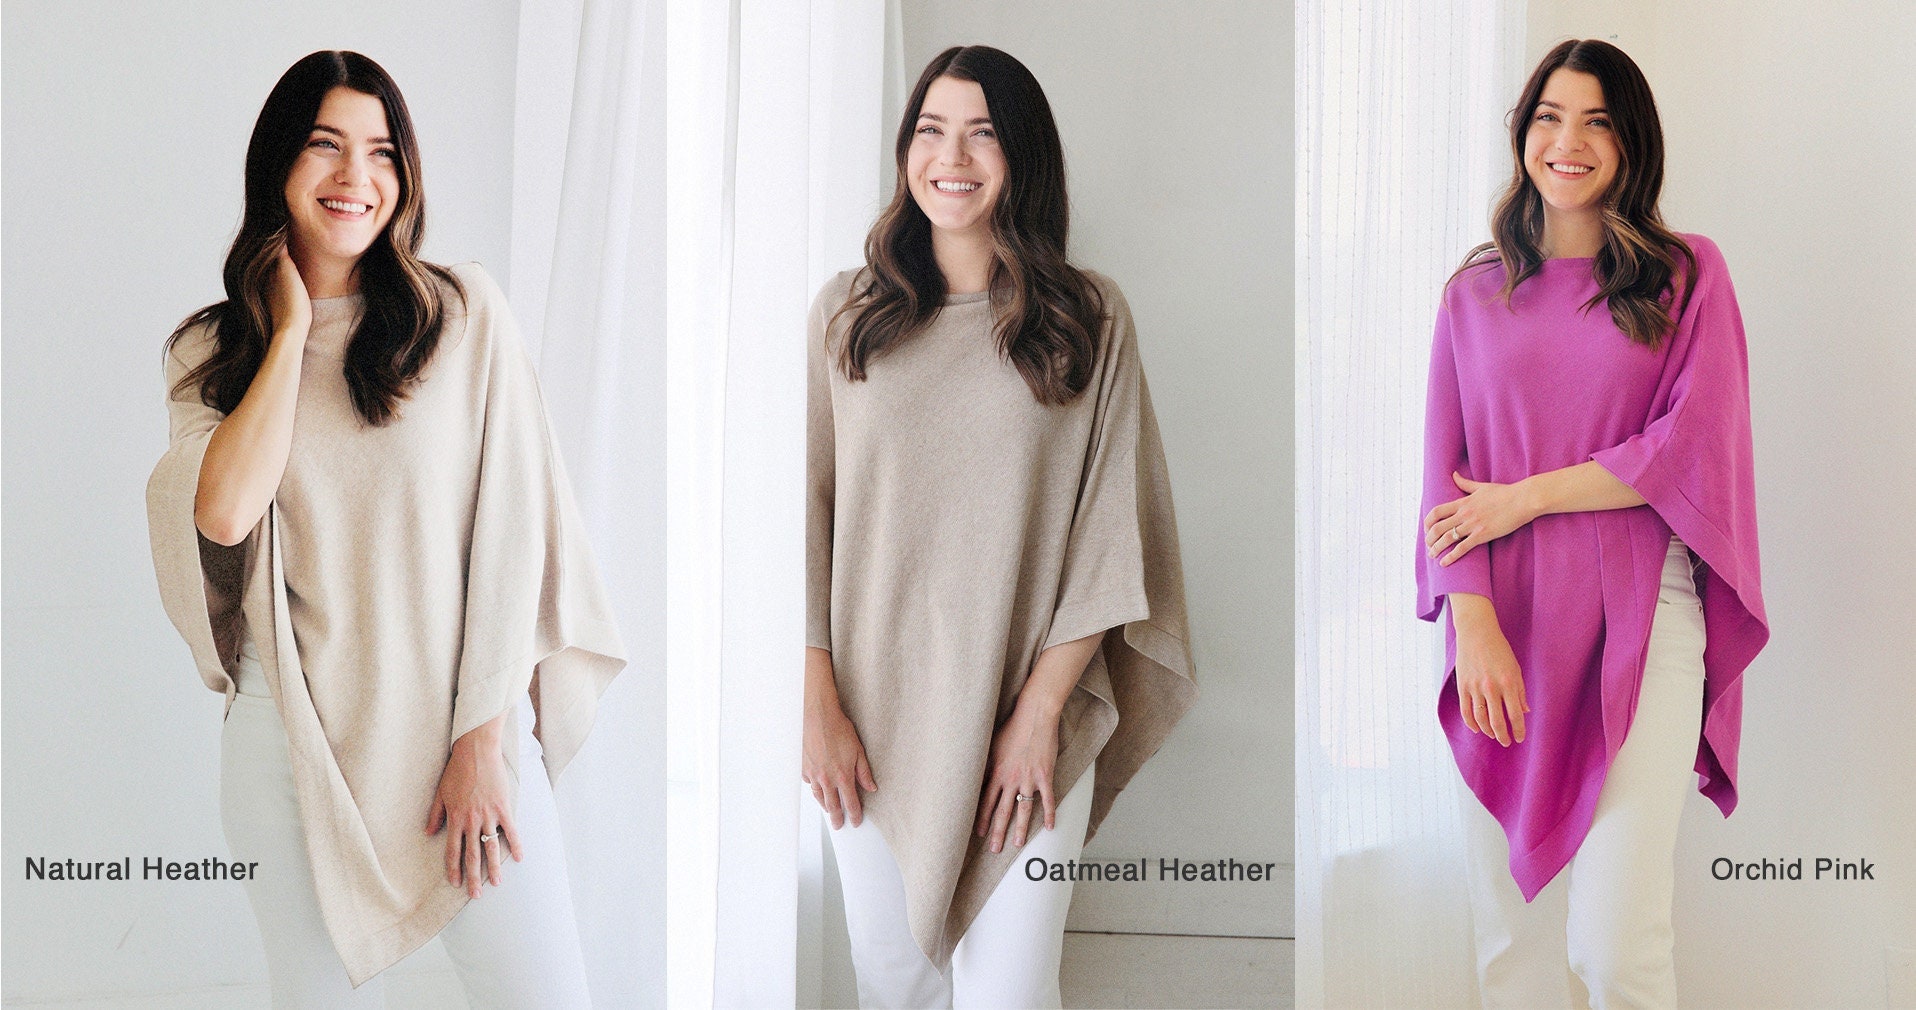 Organic Cotton Poncho Sweater Pullover more Colors It - Etsy